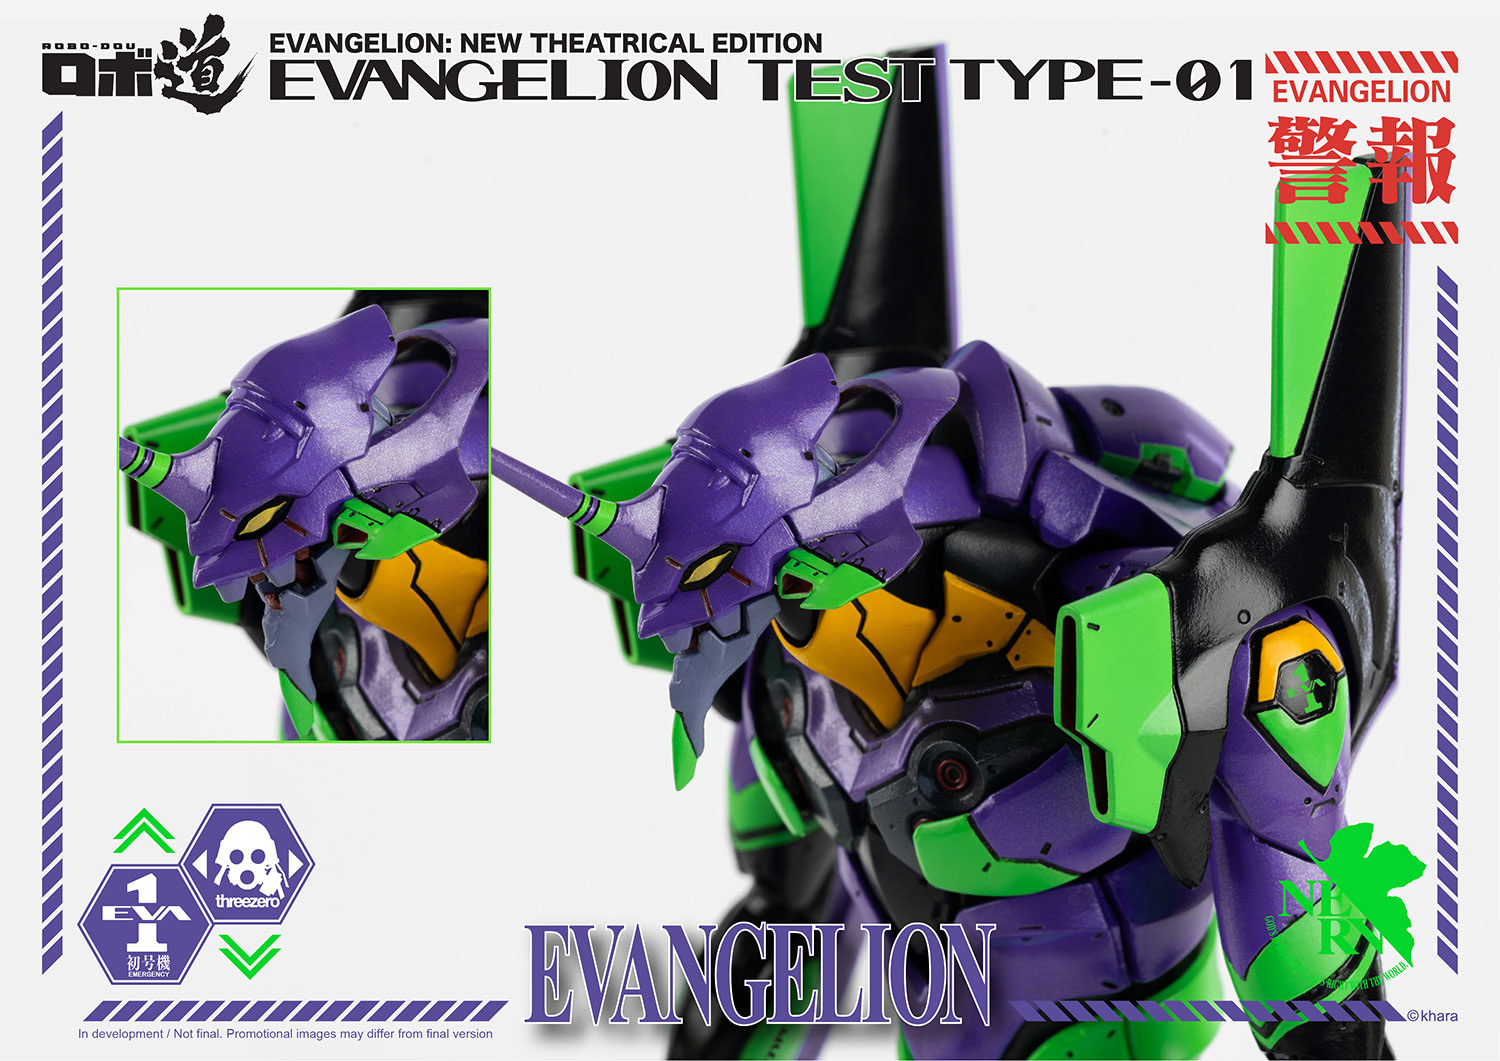 “Evangelion” Is Getting a Theatrical Edition Figure from Threezero